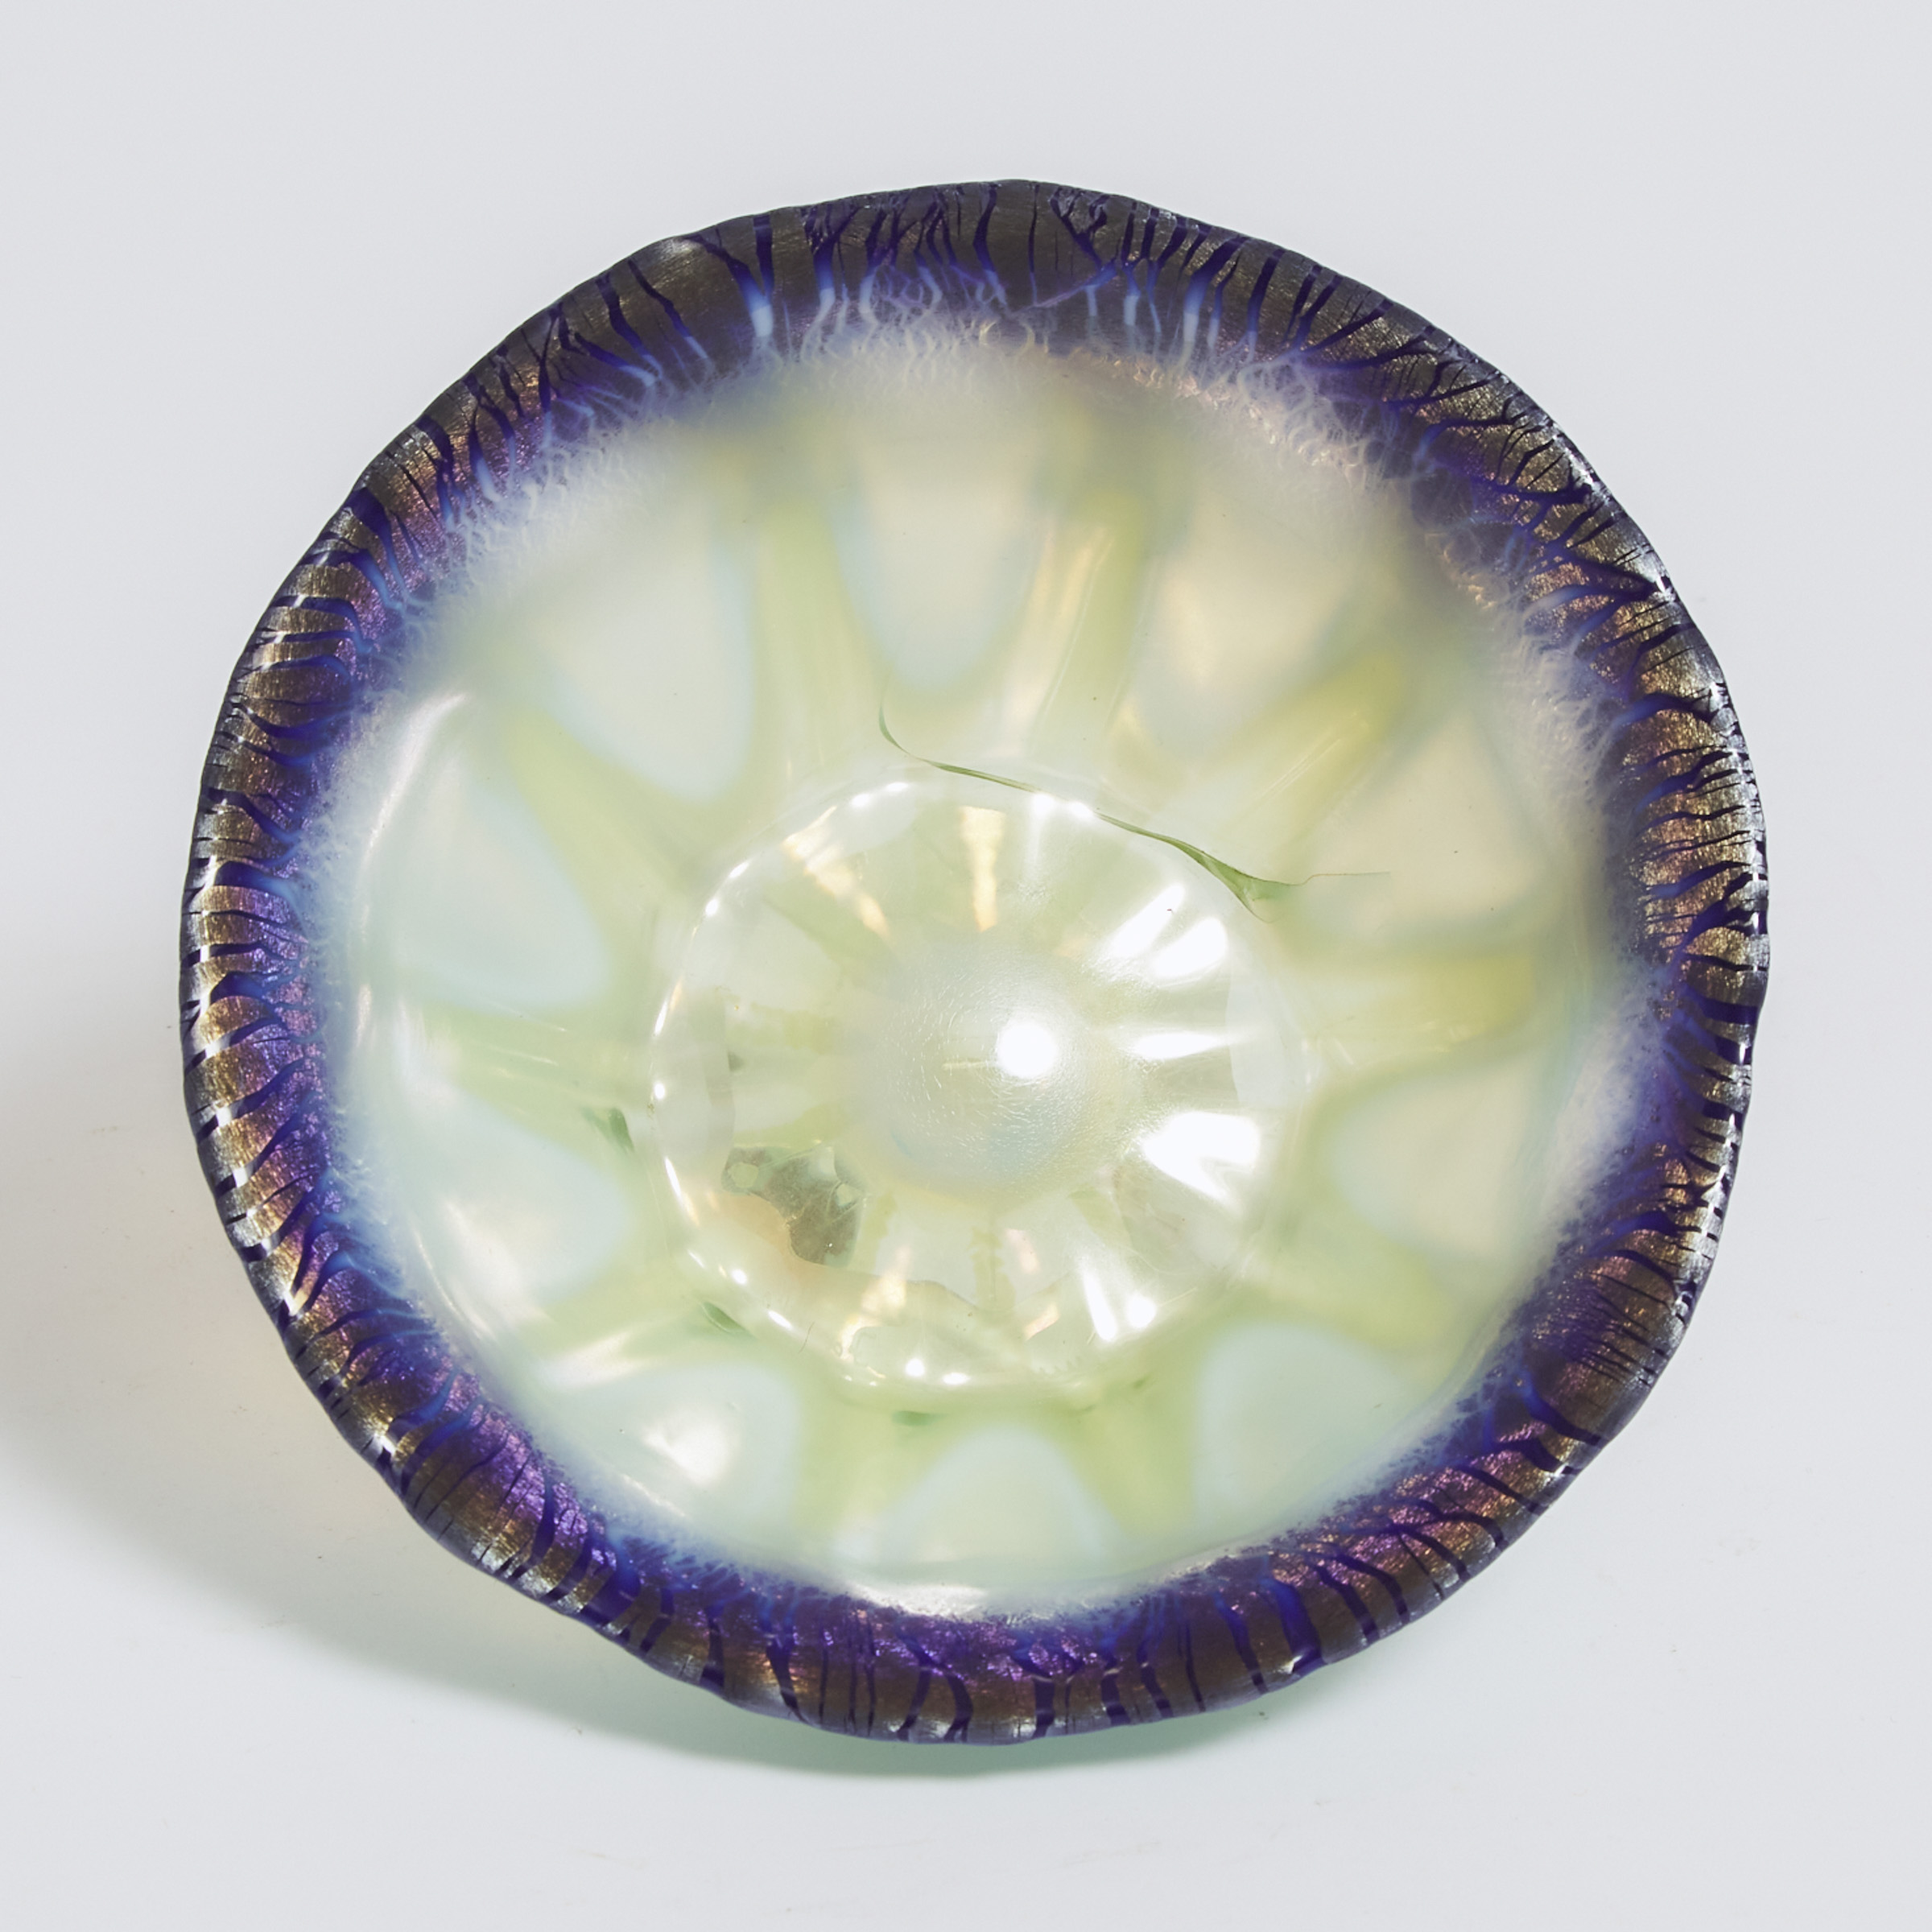 Tiffany 'Favrile' Iridescent Glass Bowl, early 20th century